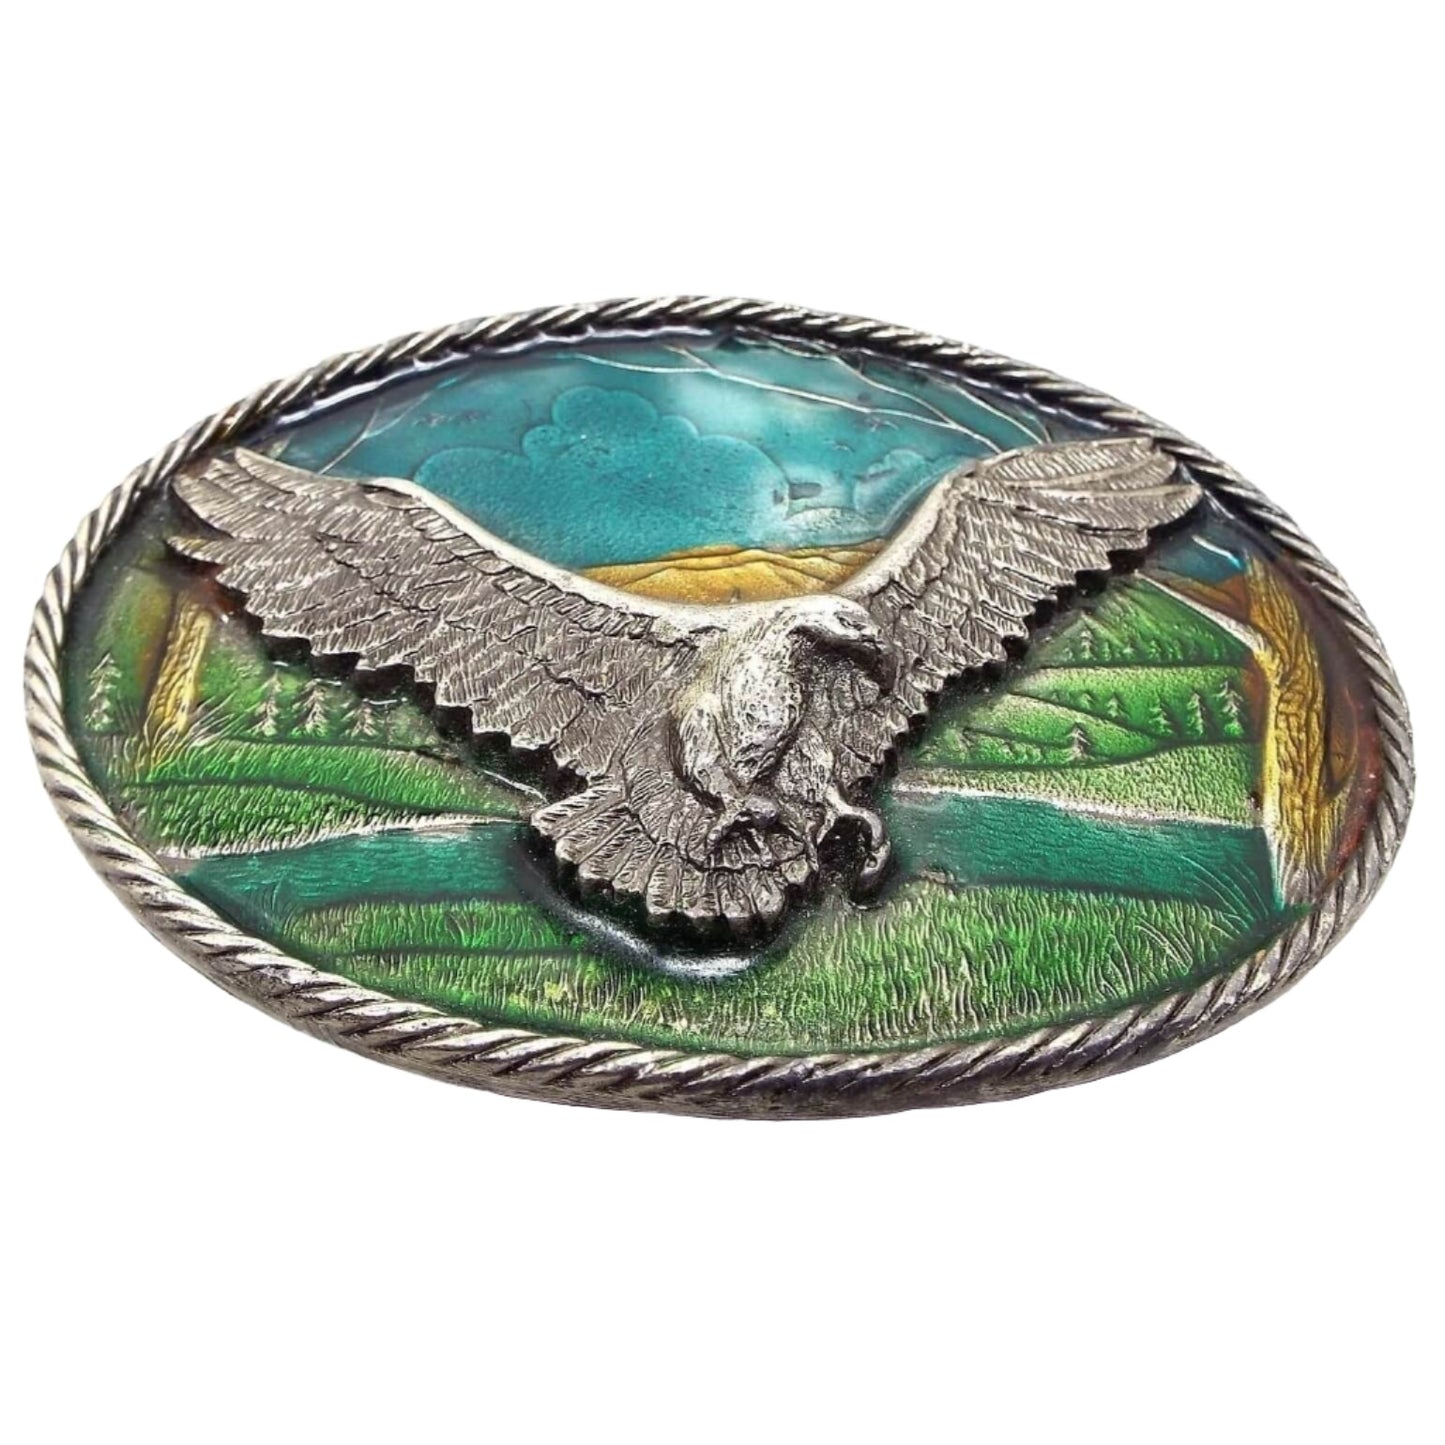 Front view of the retro vintage belt buckle from The Great American Buckle Company. The buckle is a gray pewter oval with braided edge. The design is detailed and textured with a flying eagle with its wings spread in the middle. The background is an enameled scenery of grass, trees, and sky, in shades of blue, green, and brown. 